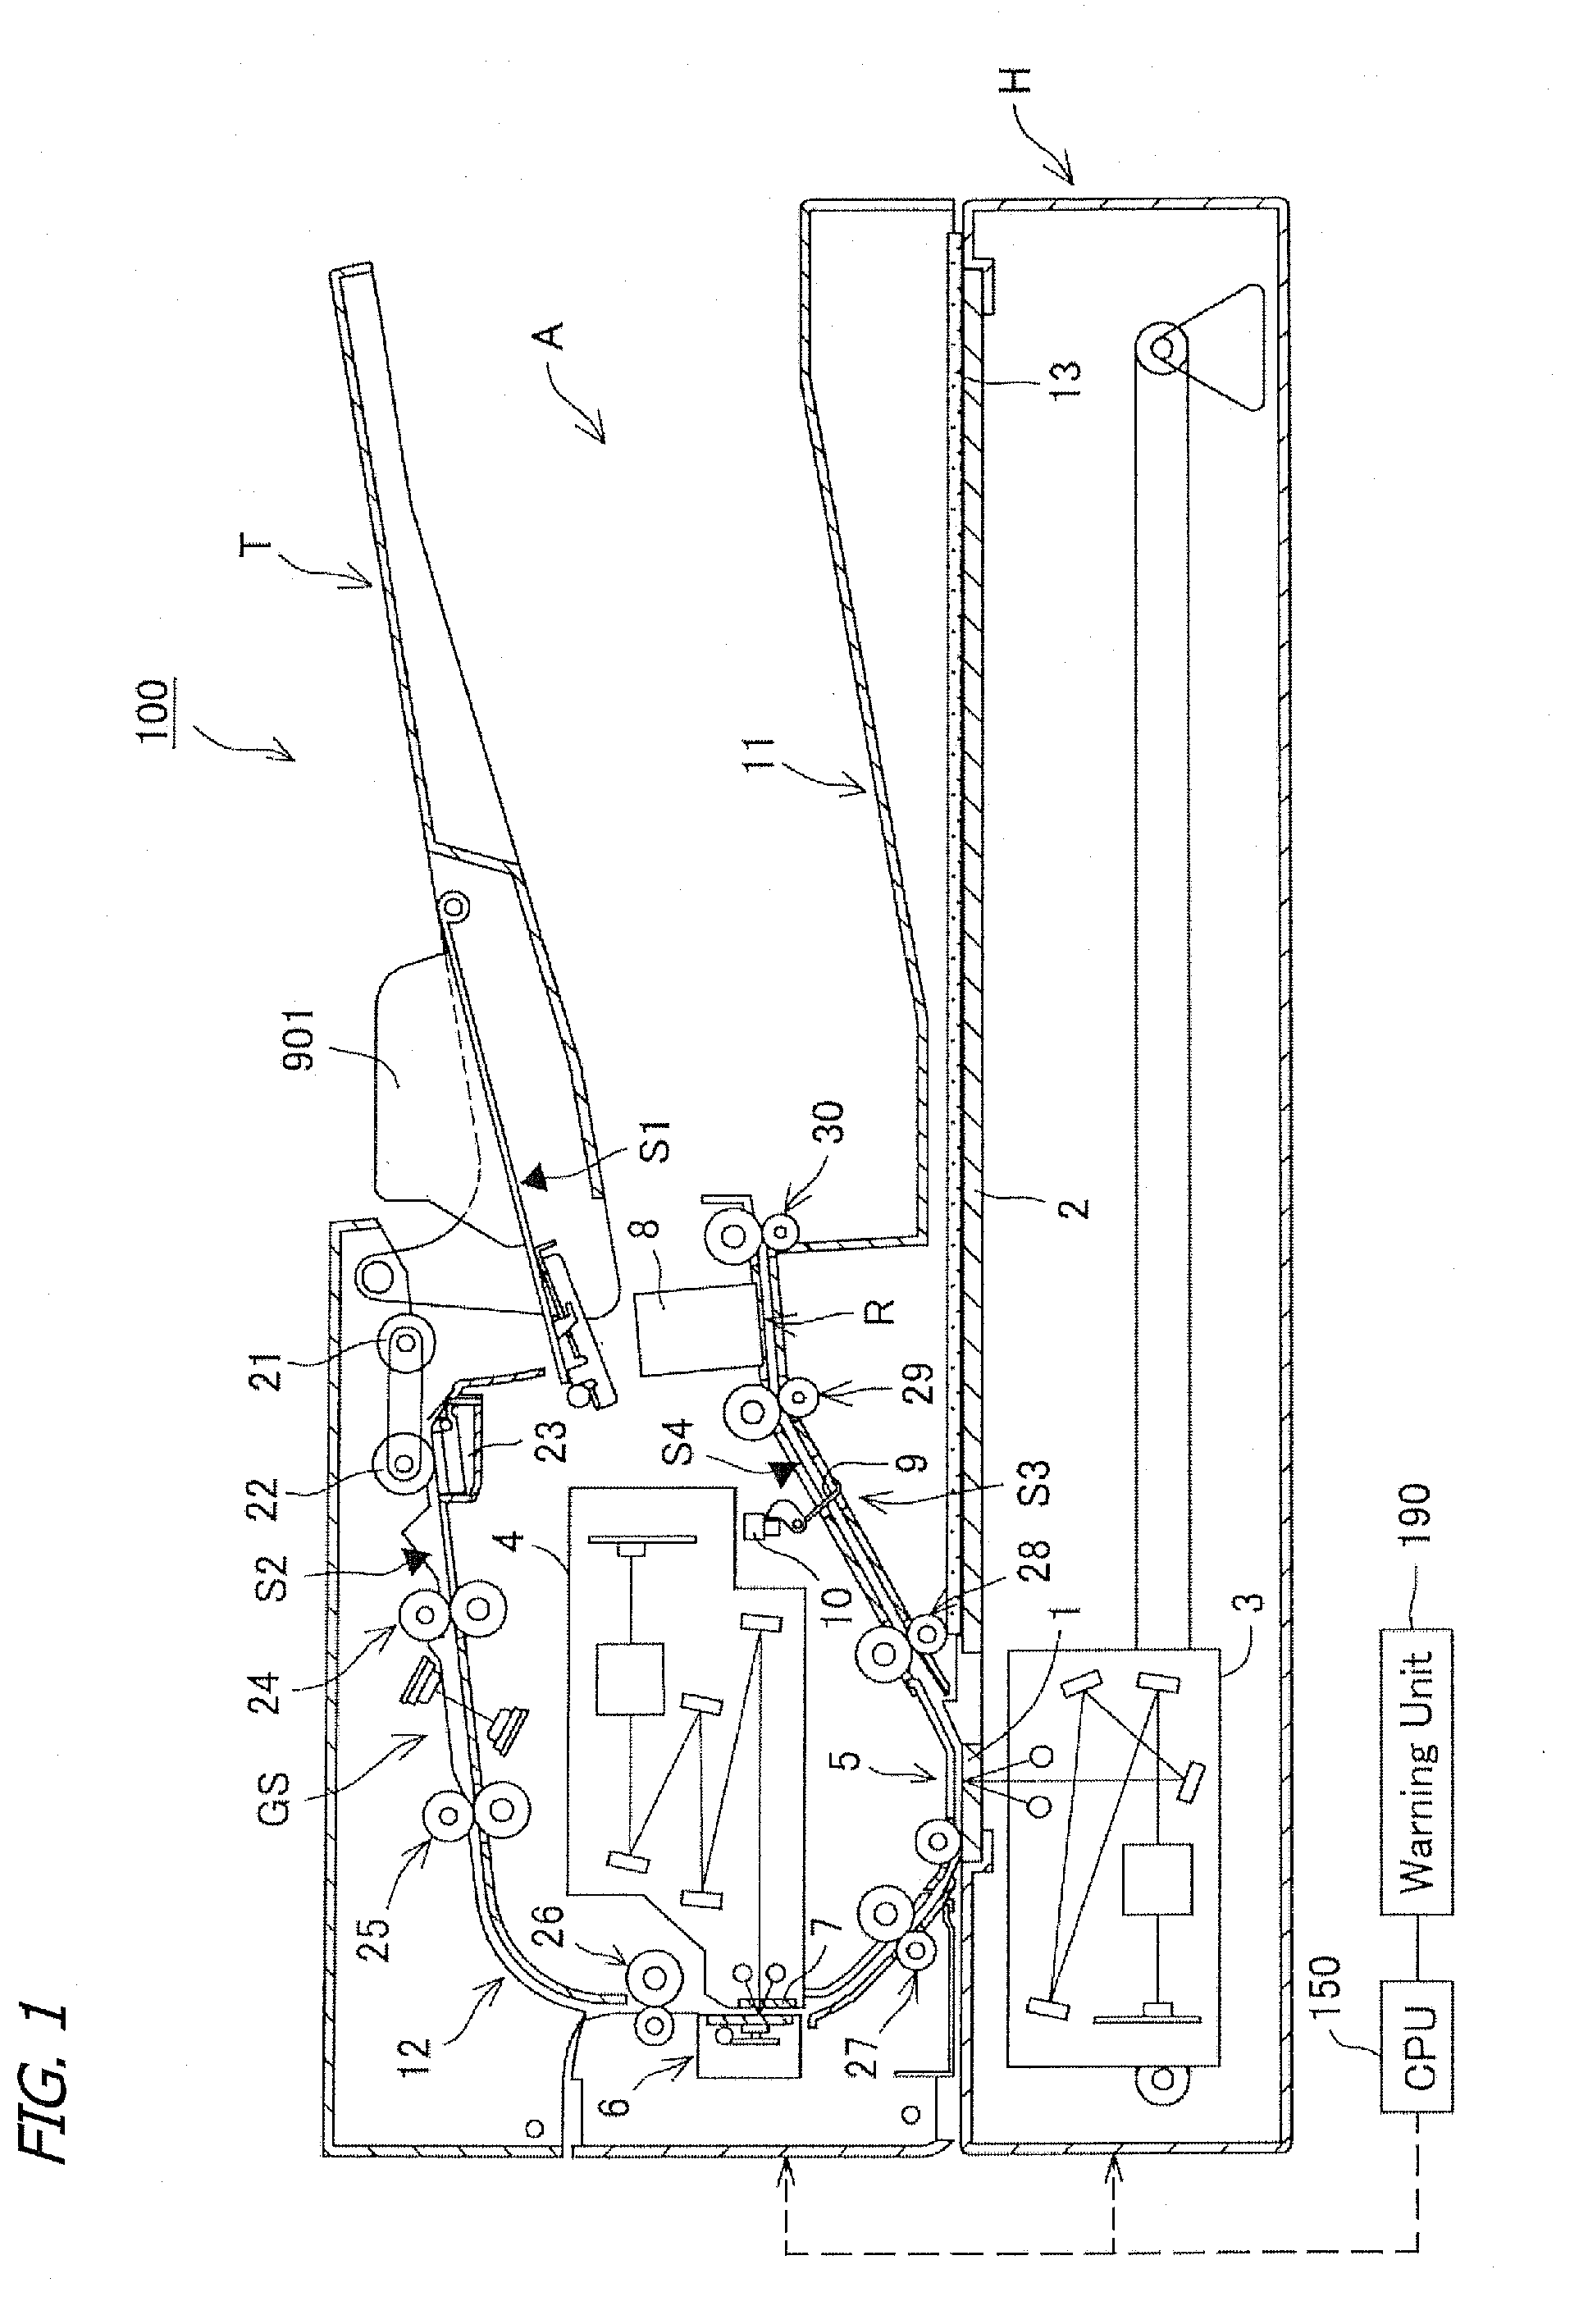 Document Feeder and Image Capturing Device